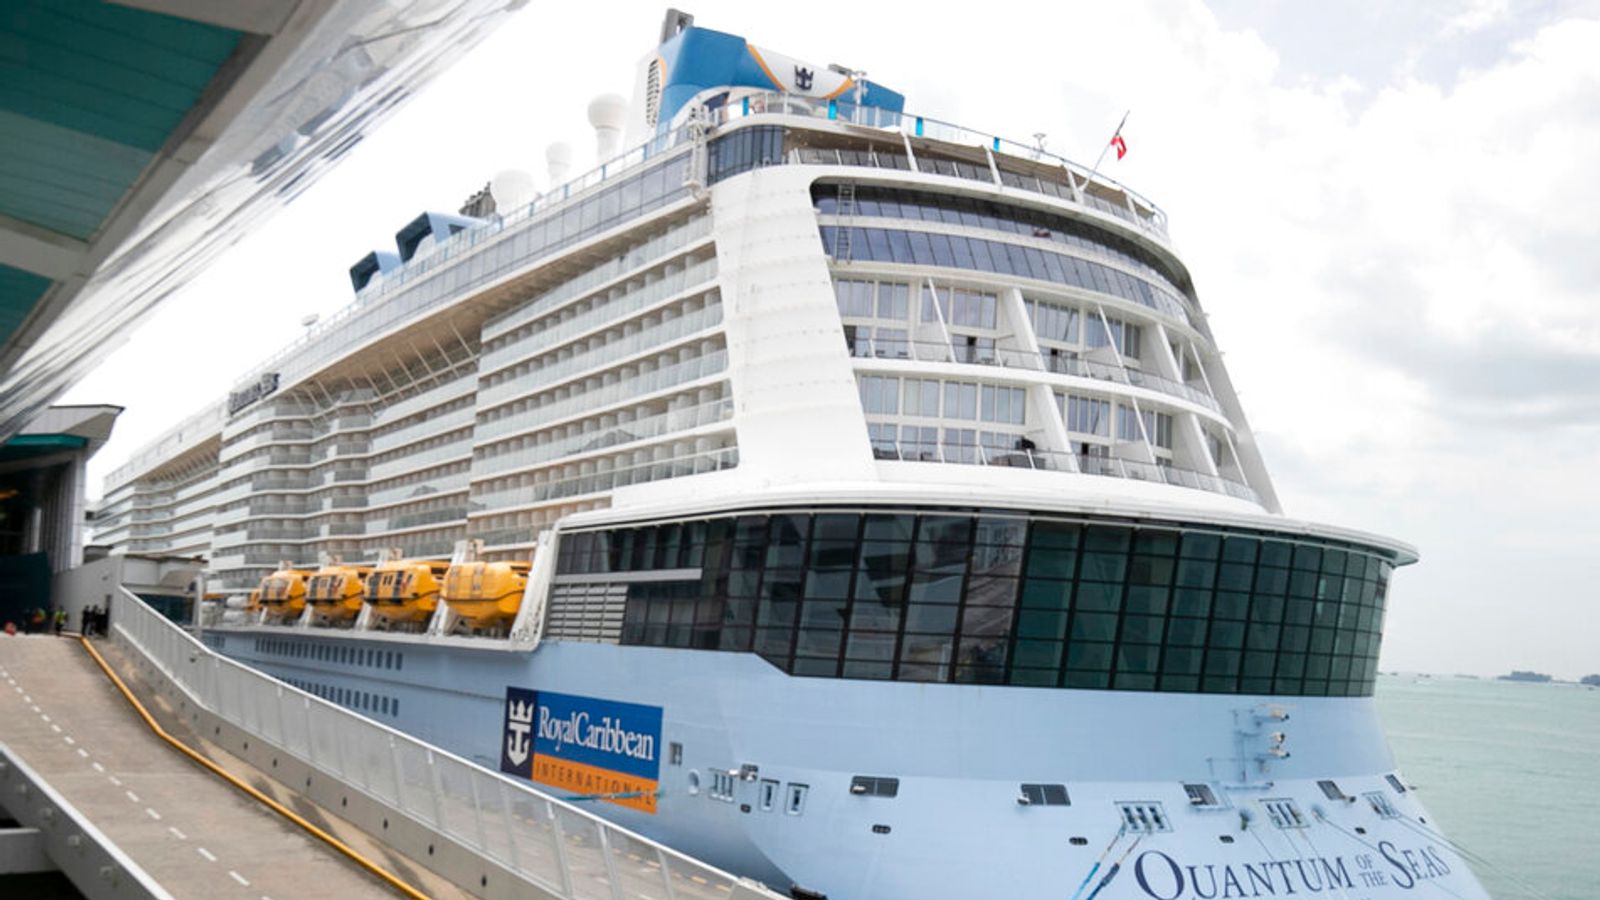 Man on Royal Caribbean cruise ship goes overboard - with rescue operation under way